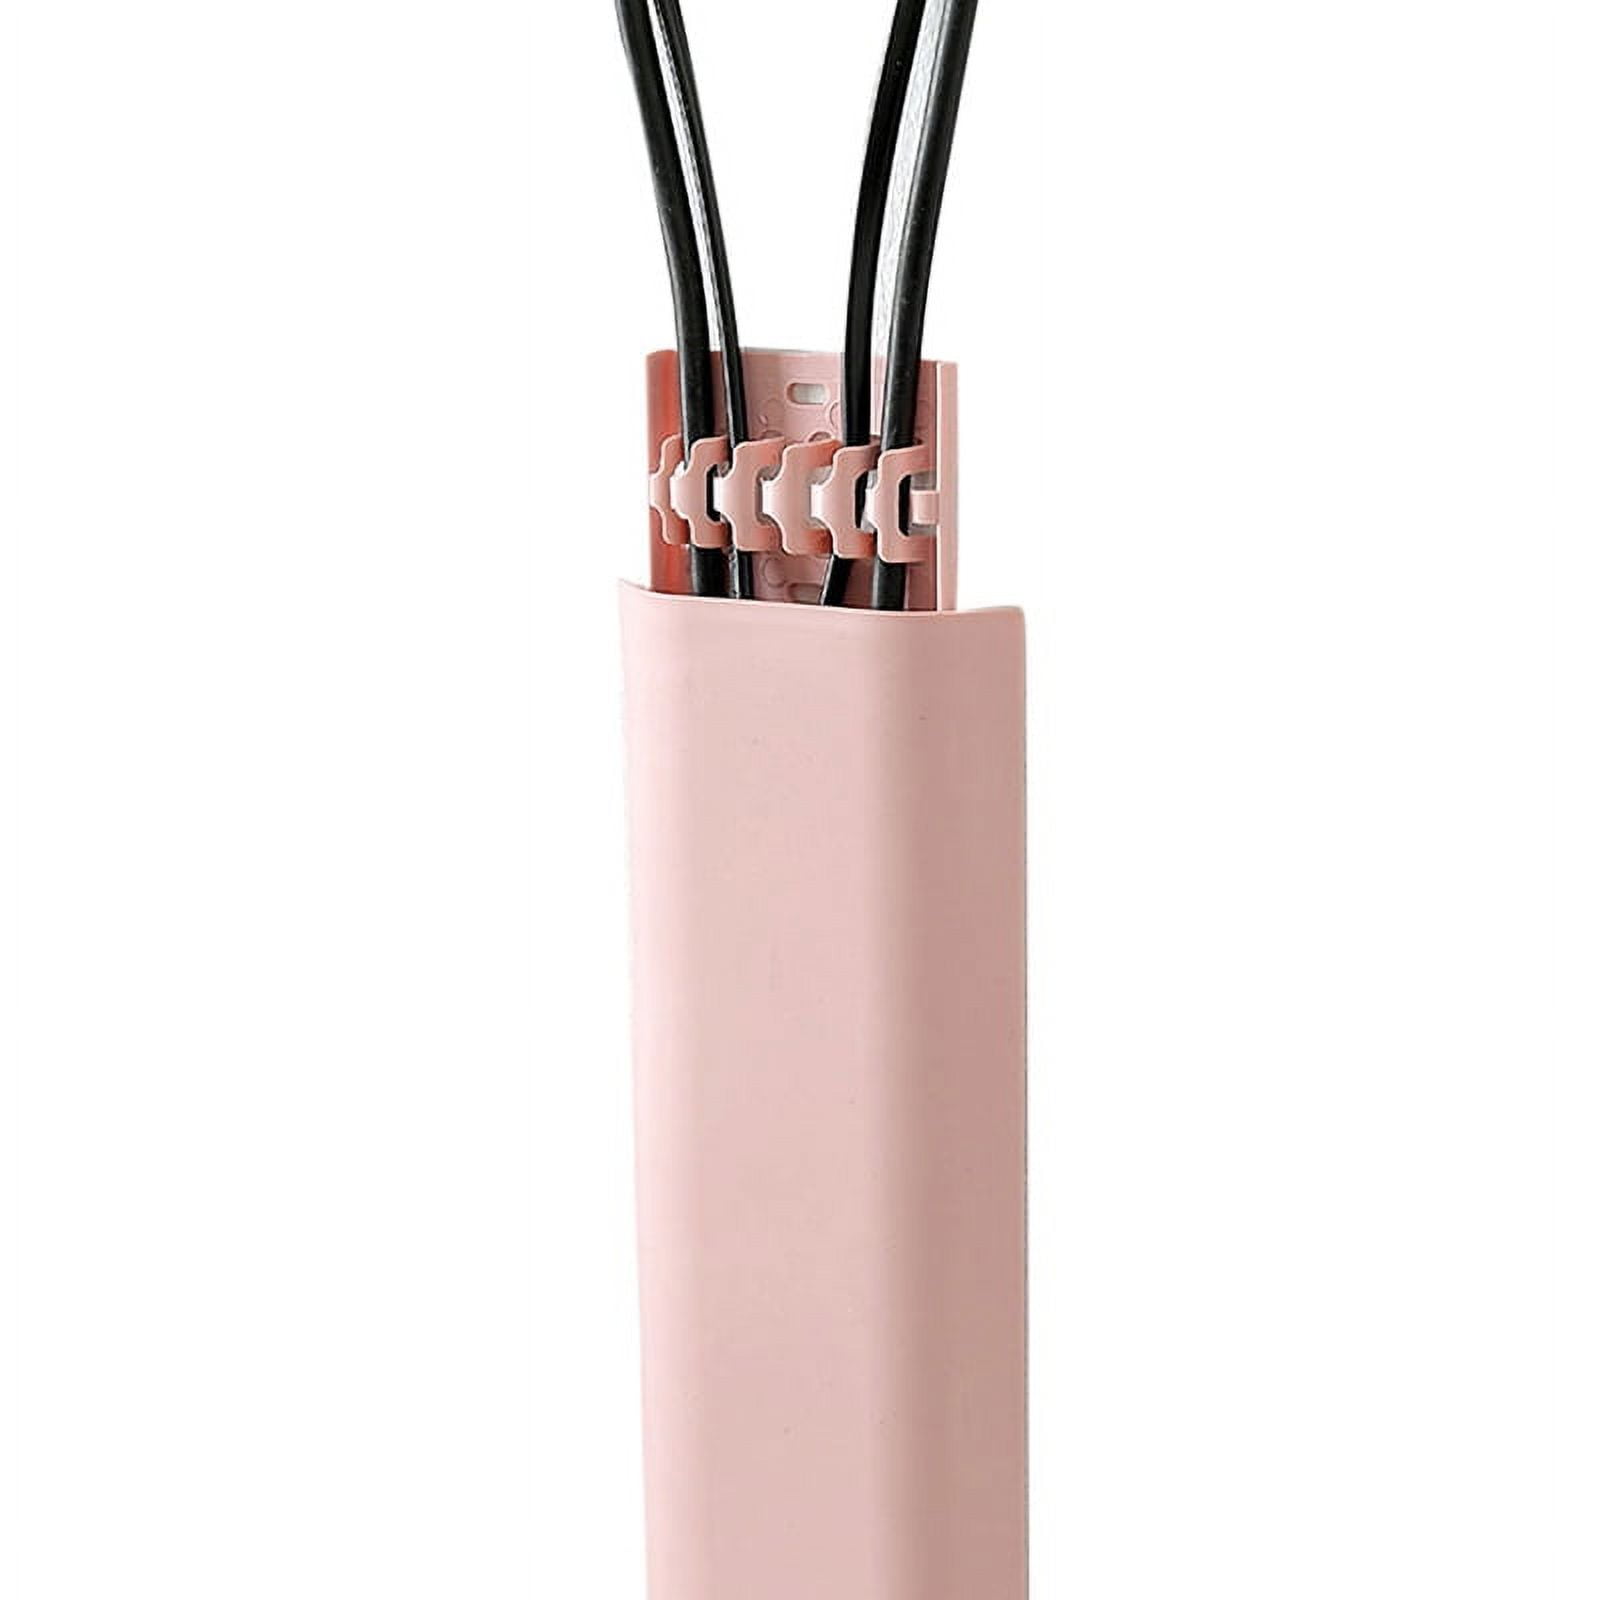 Cable Raceway Cord Cover for Wall 39Lx2Wx0.6H Cord Hider Channel Light  Pink for TV Wire Management 